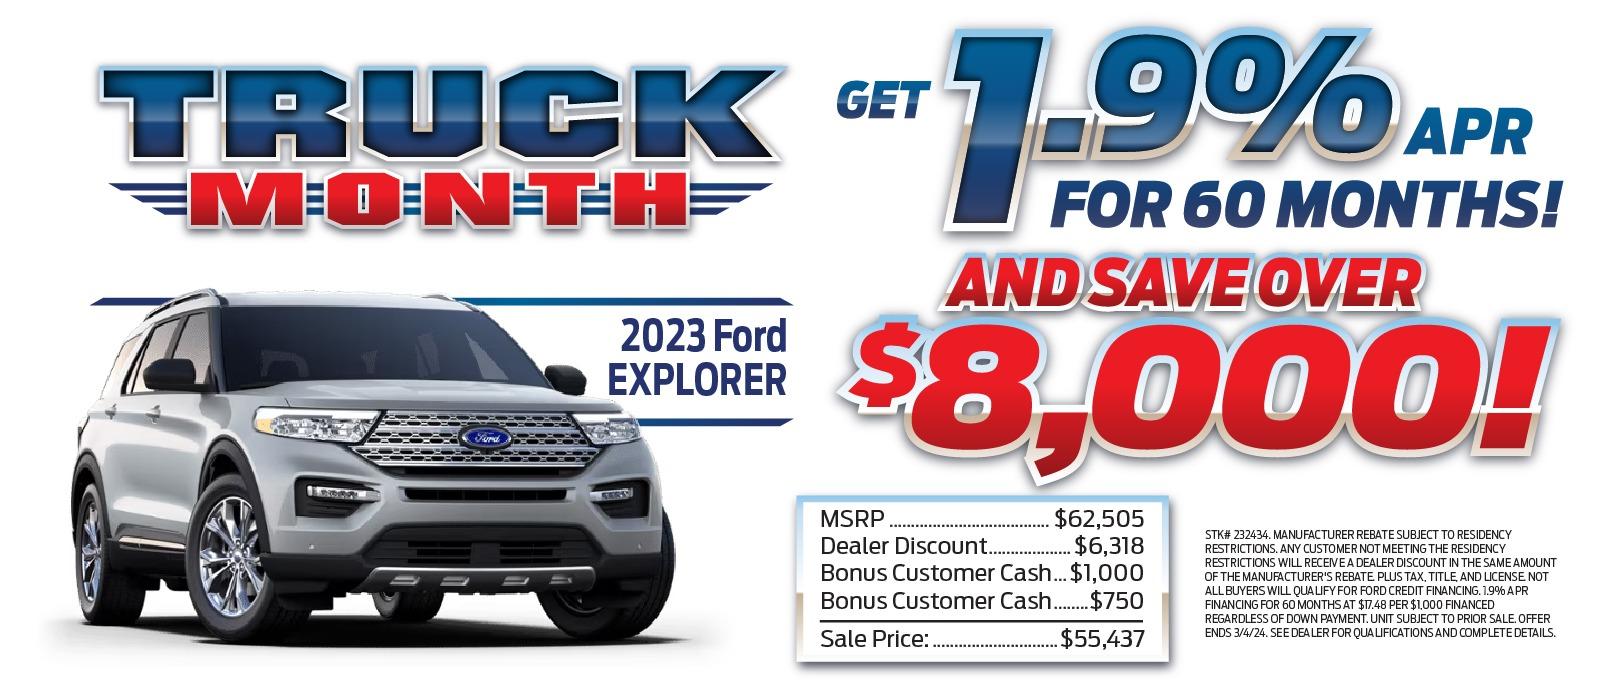 2023 Ford Explorer
Save Over $8,000
And
1.9% APR
For 60 Months!